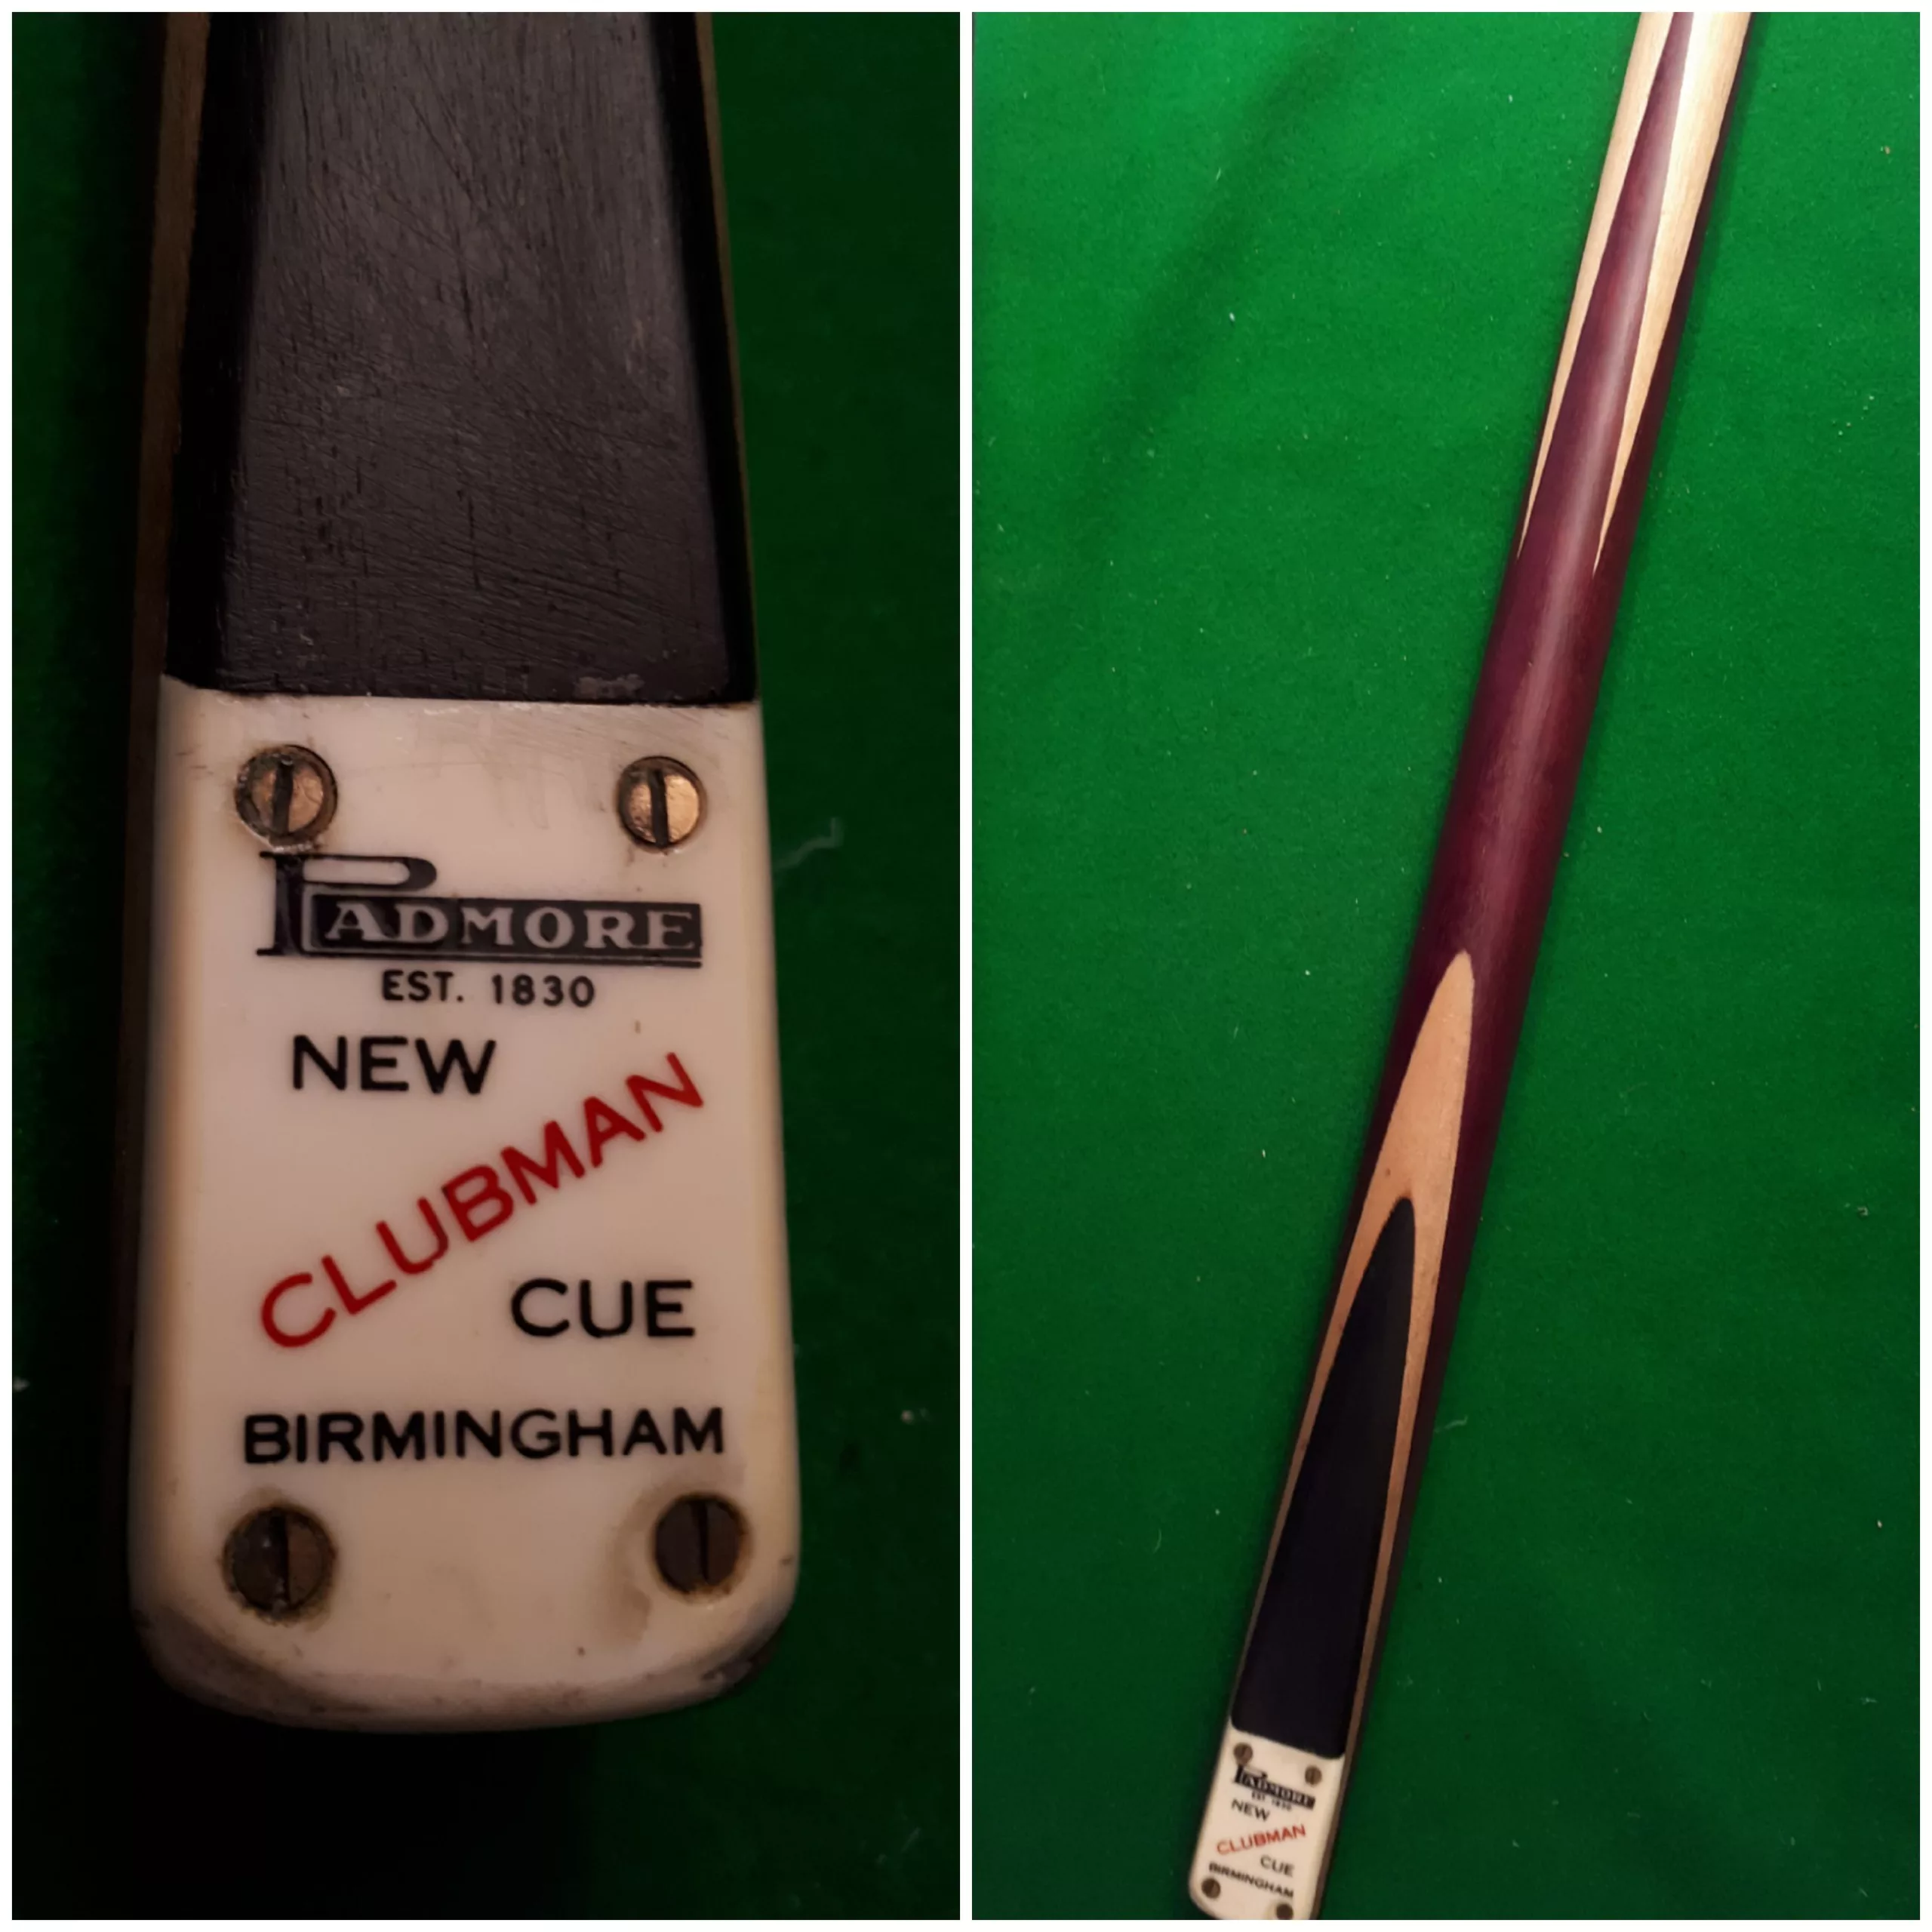 Padmore New Clubman cue